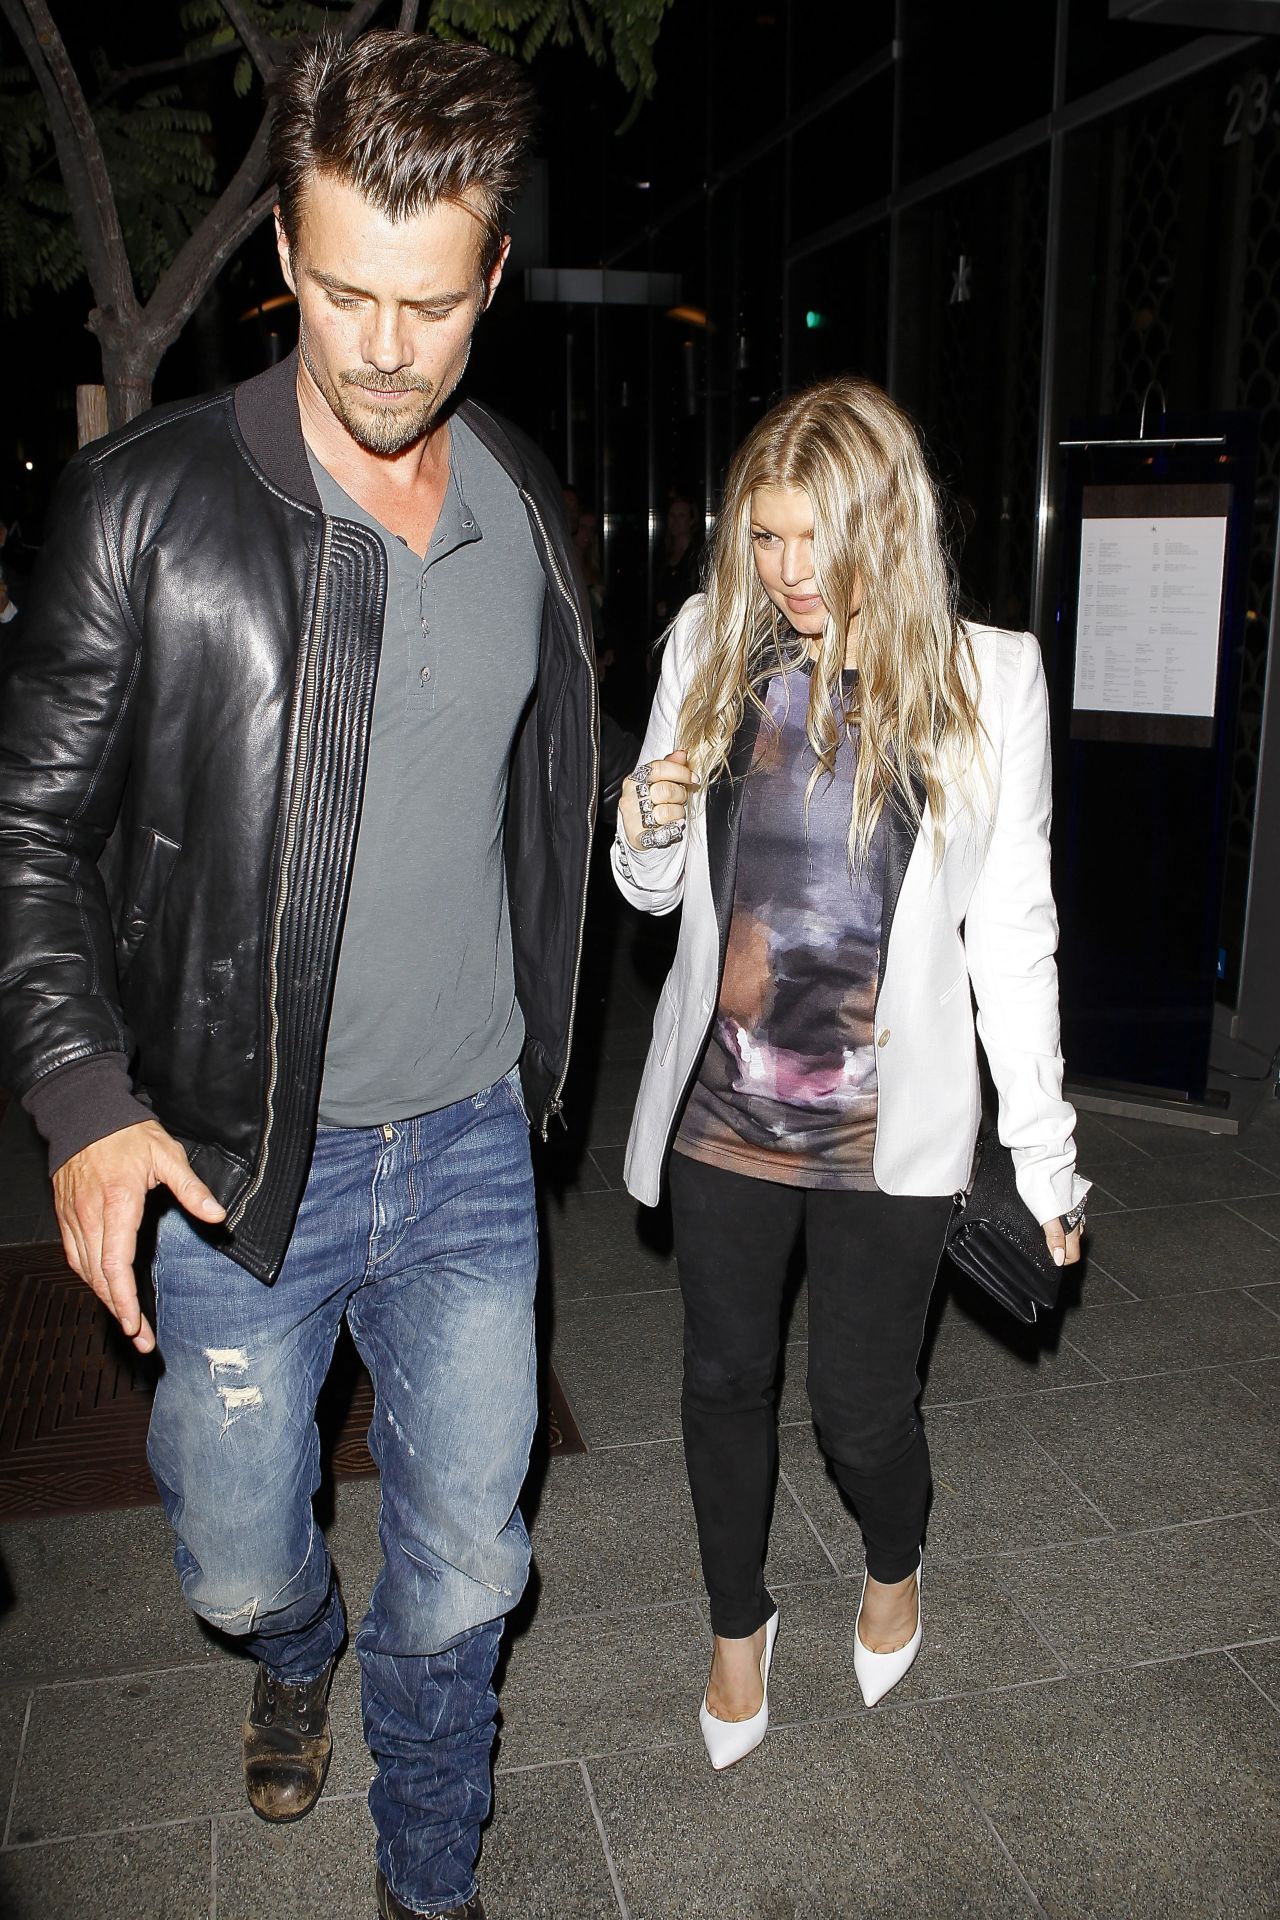 New parents Josh Duhamel and Fergie step out for a date on September 25.